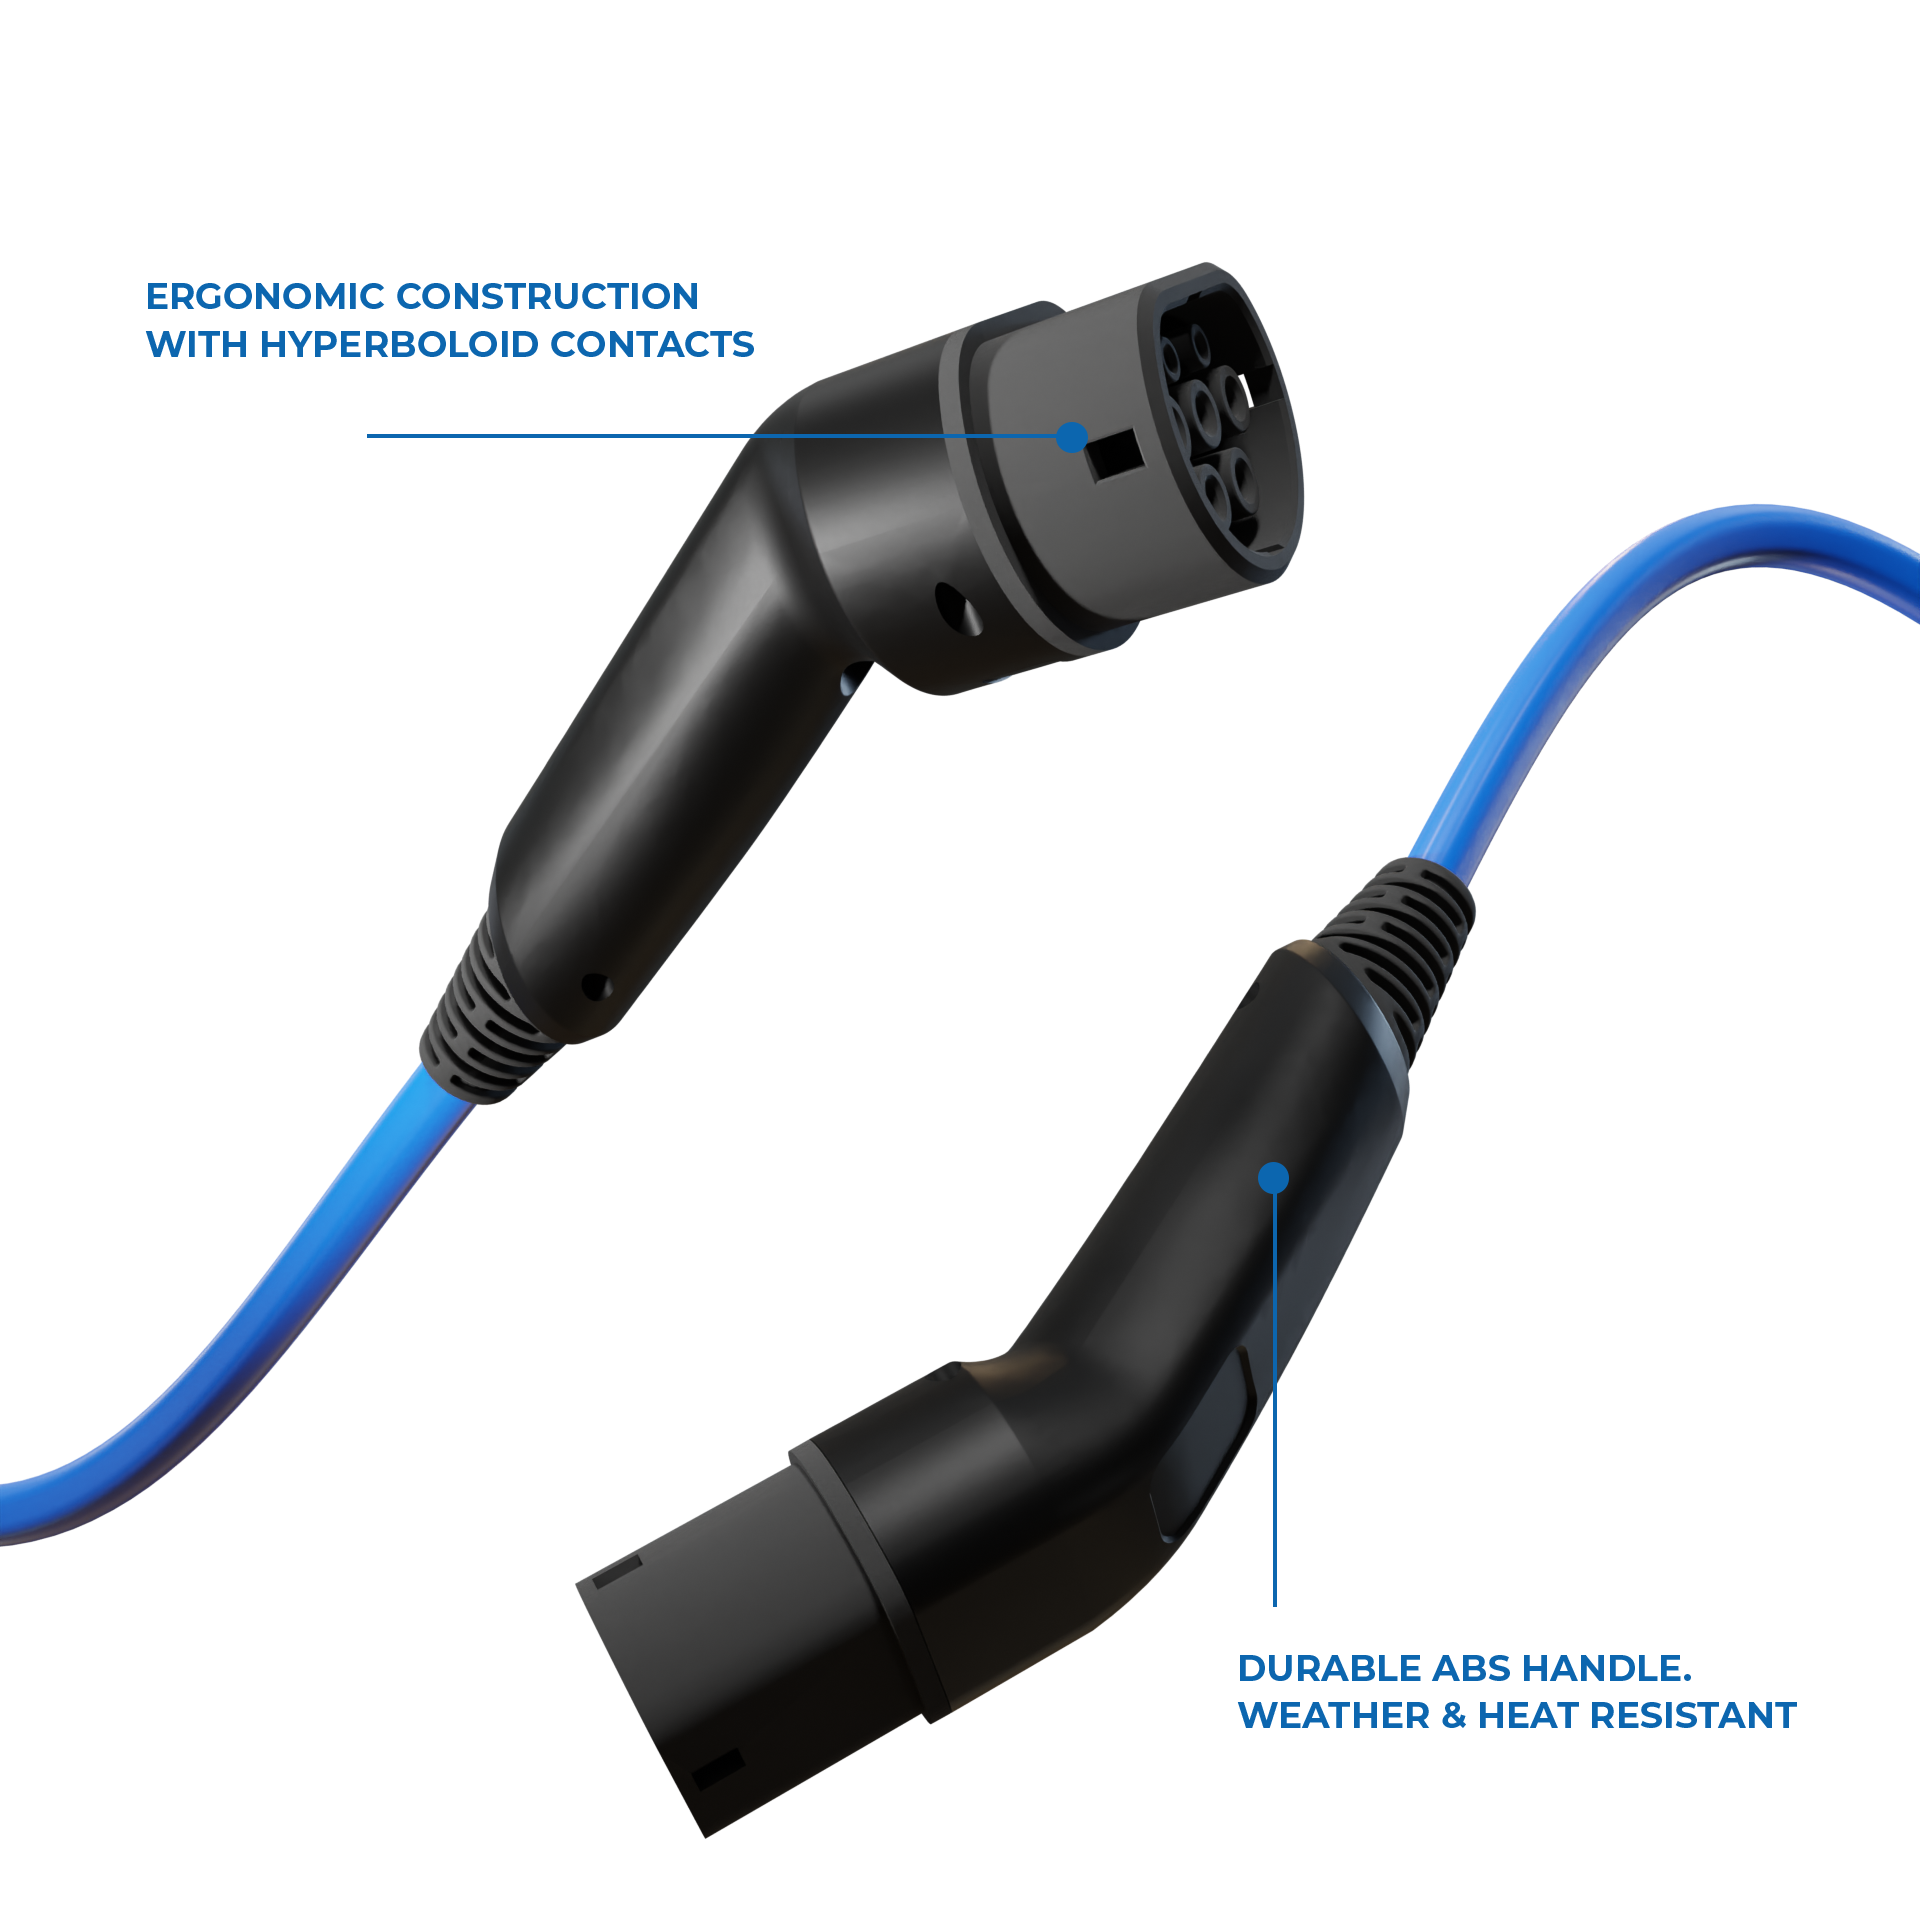 Type 2 Tethered EV Charging Cable